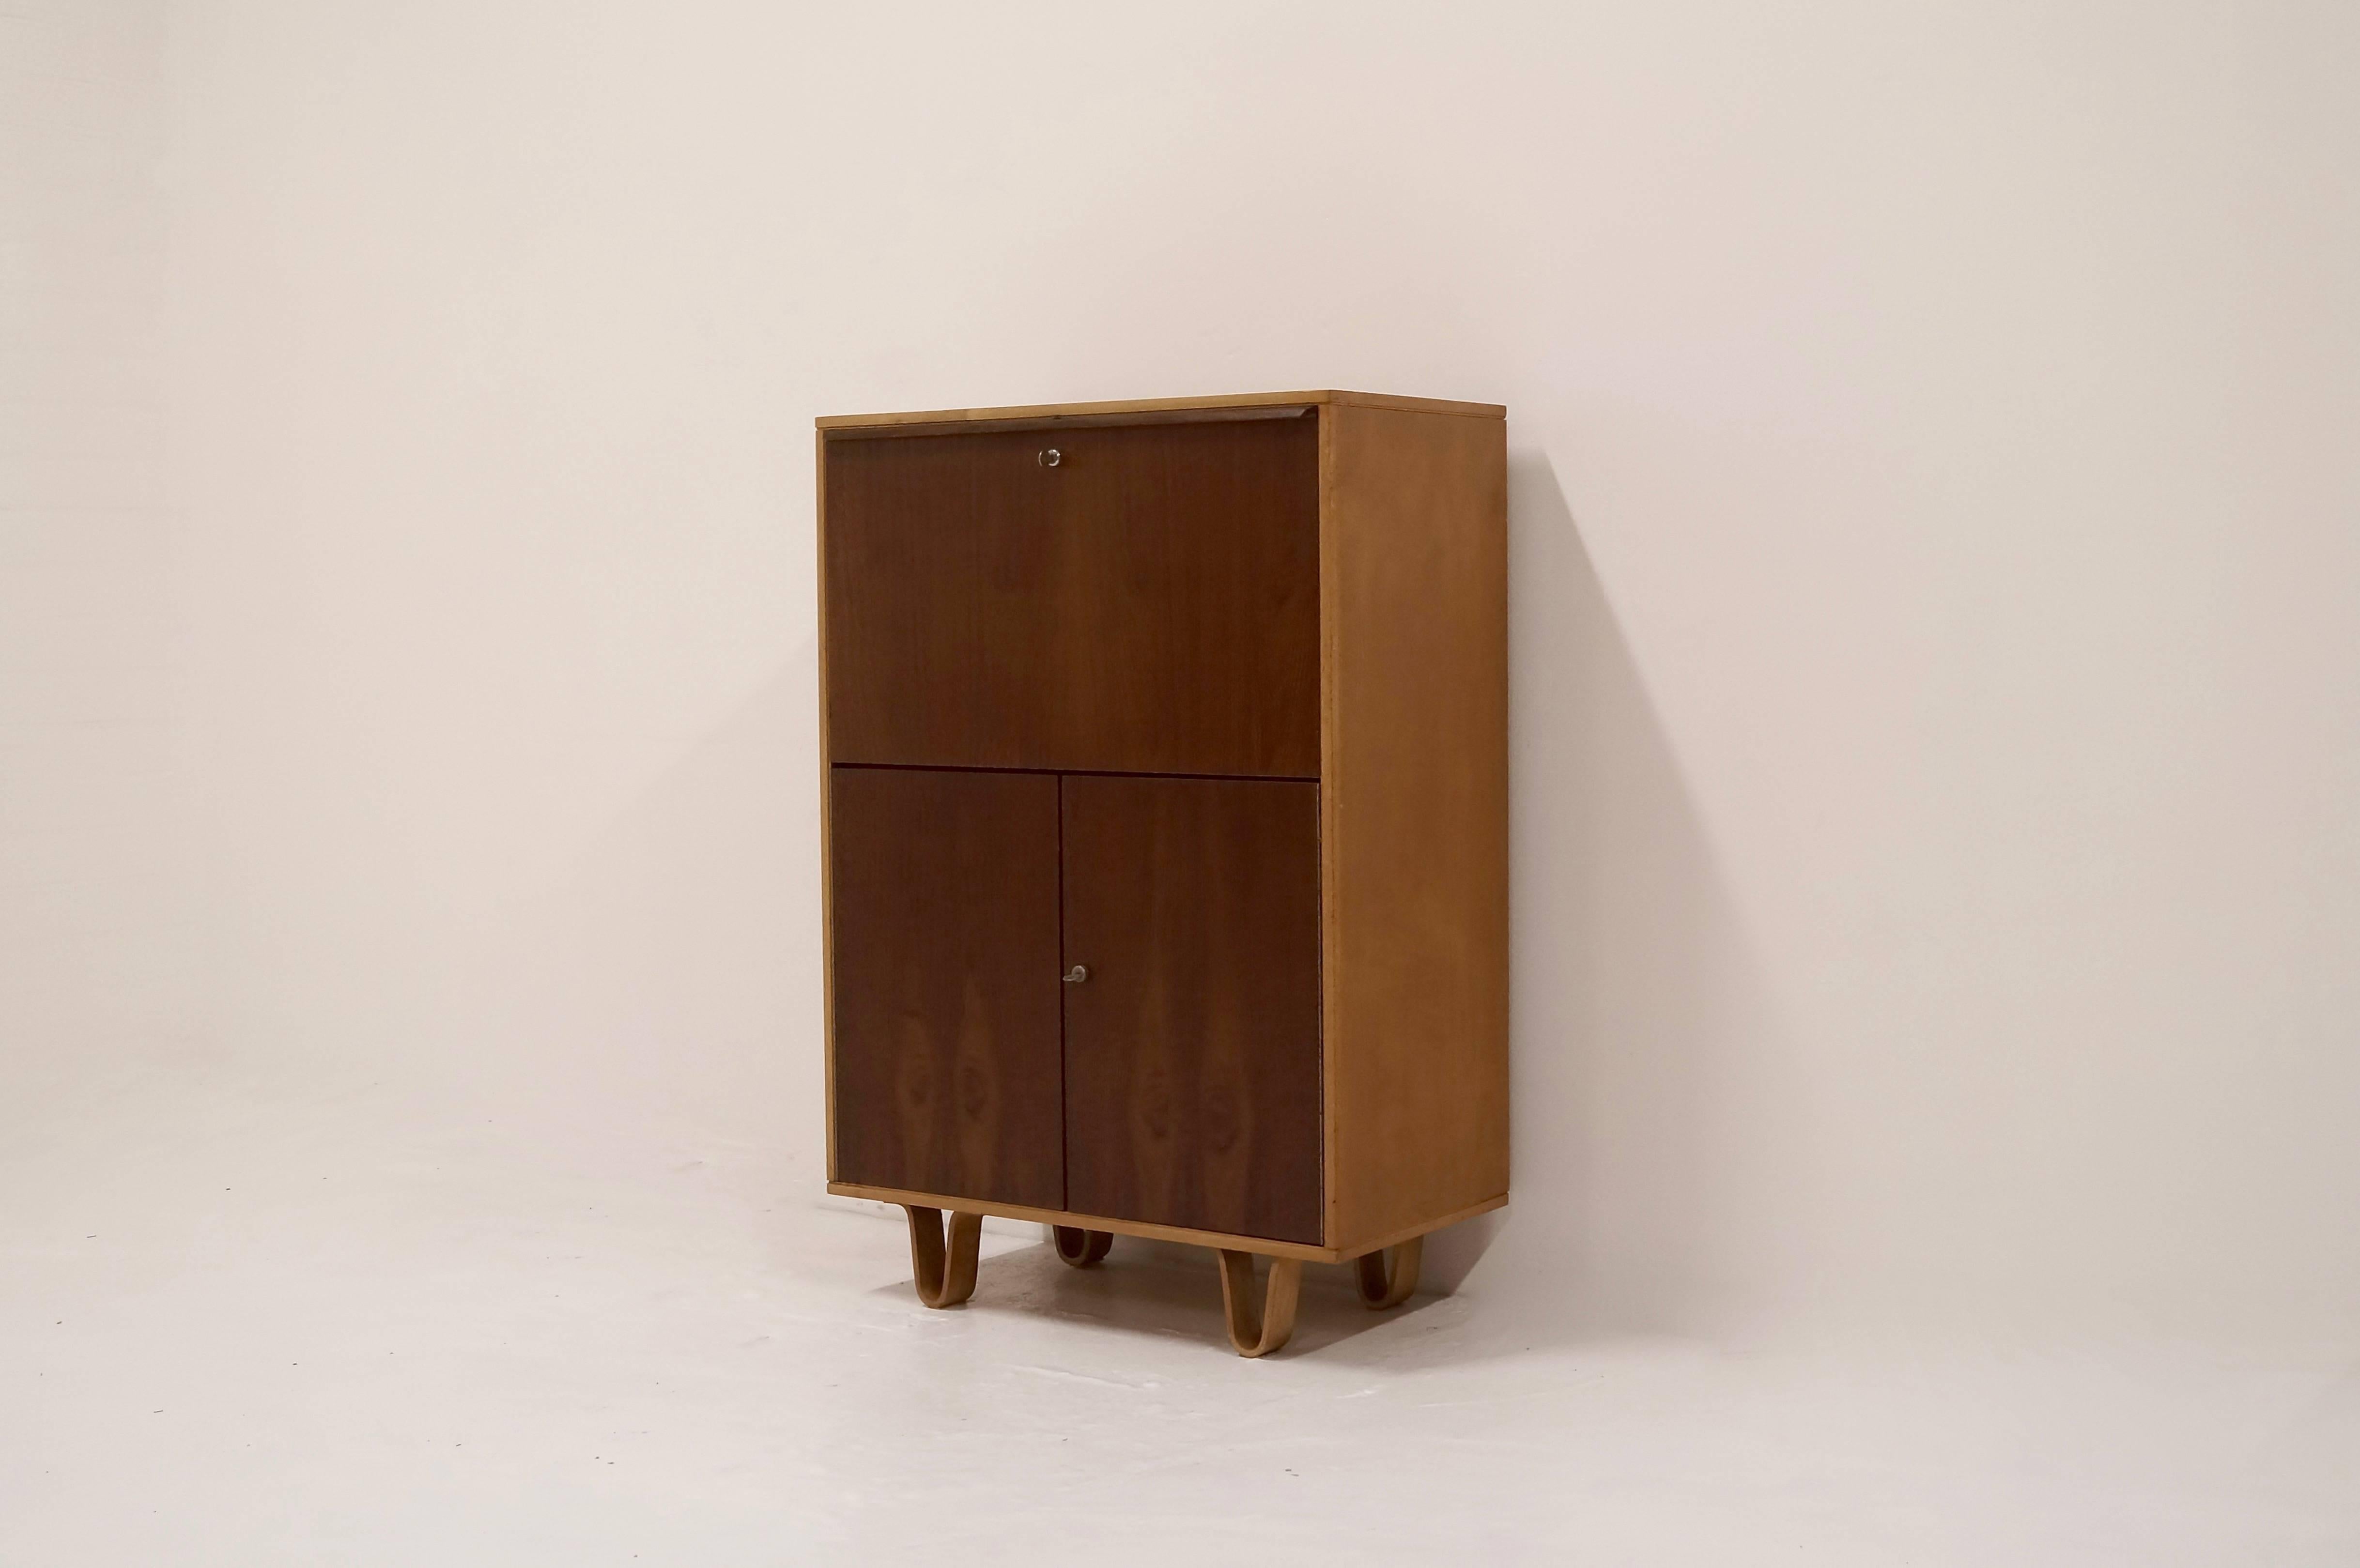 UMS Pastoe CB07 writing desk cabinet designed by Cees Braakman for Pastoe UMS Utrecht, Holland, 1950s. The cabinet is from the infamous birch series and has distinctive bended plywood legs. Both the door panels as well as the desk top are made of